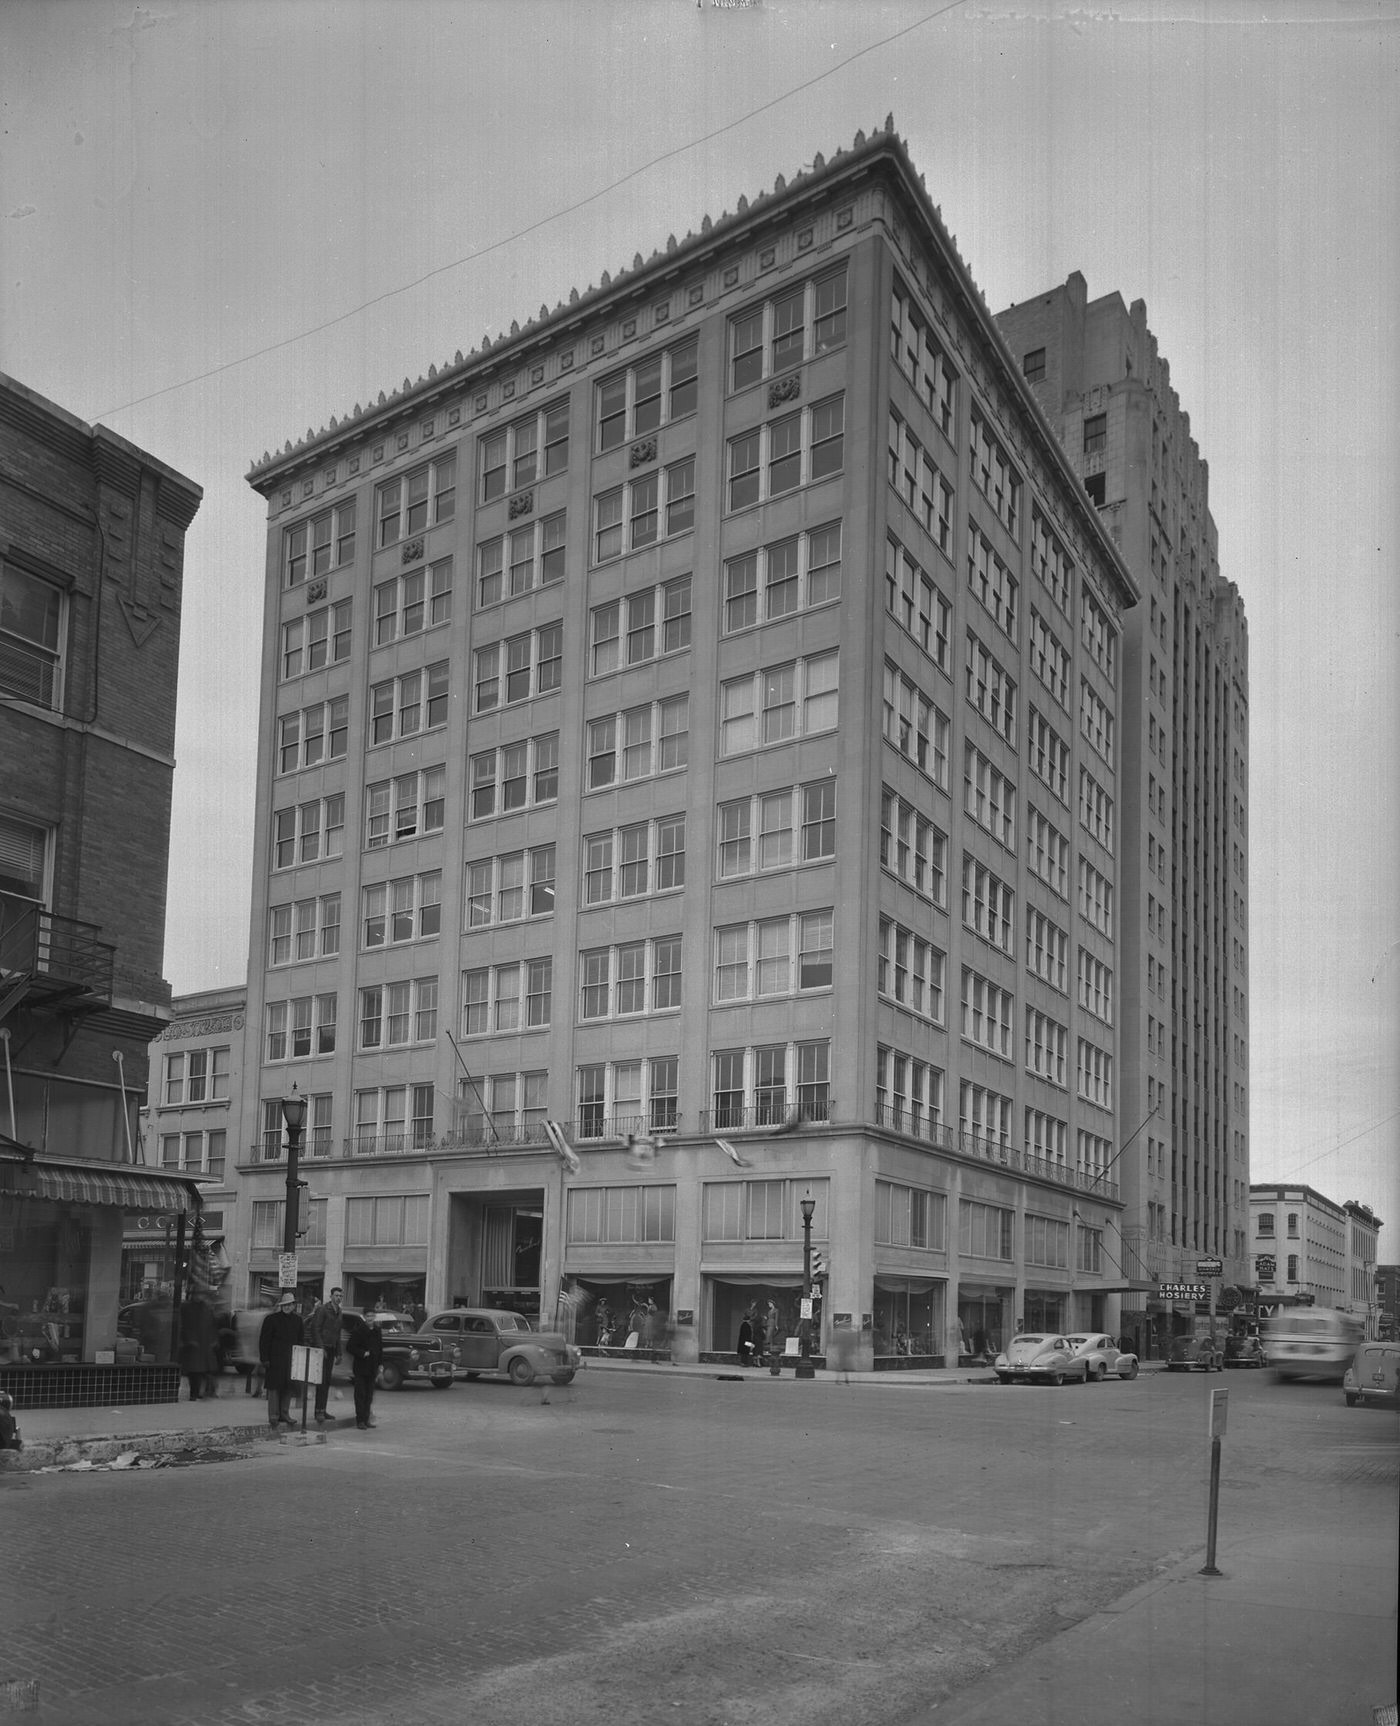 Meacham's Department Store, 515 Houston Street, downtown Fort Worth, Texas, 1949